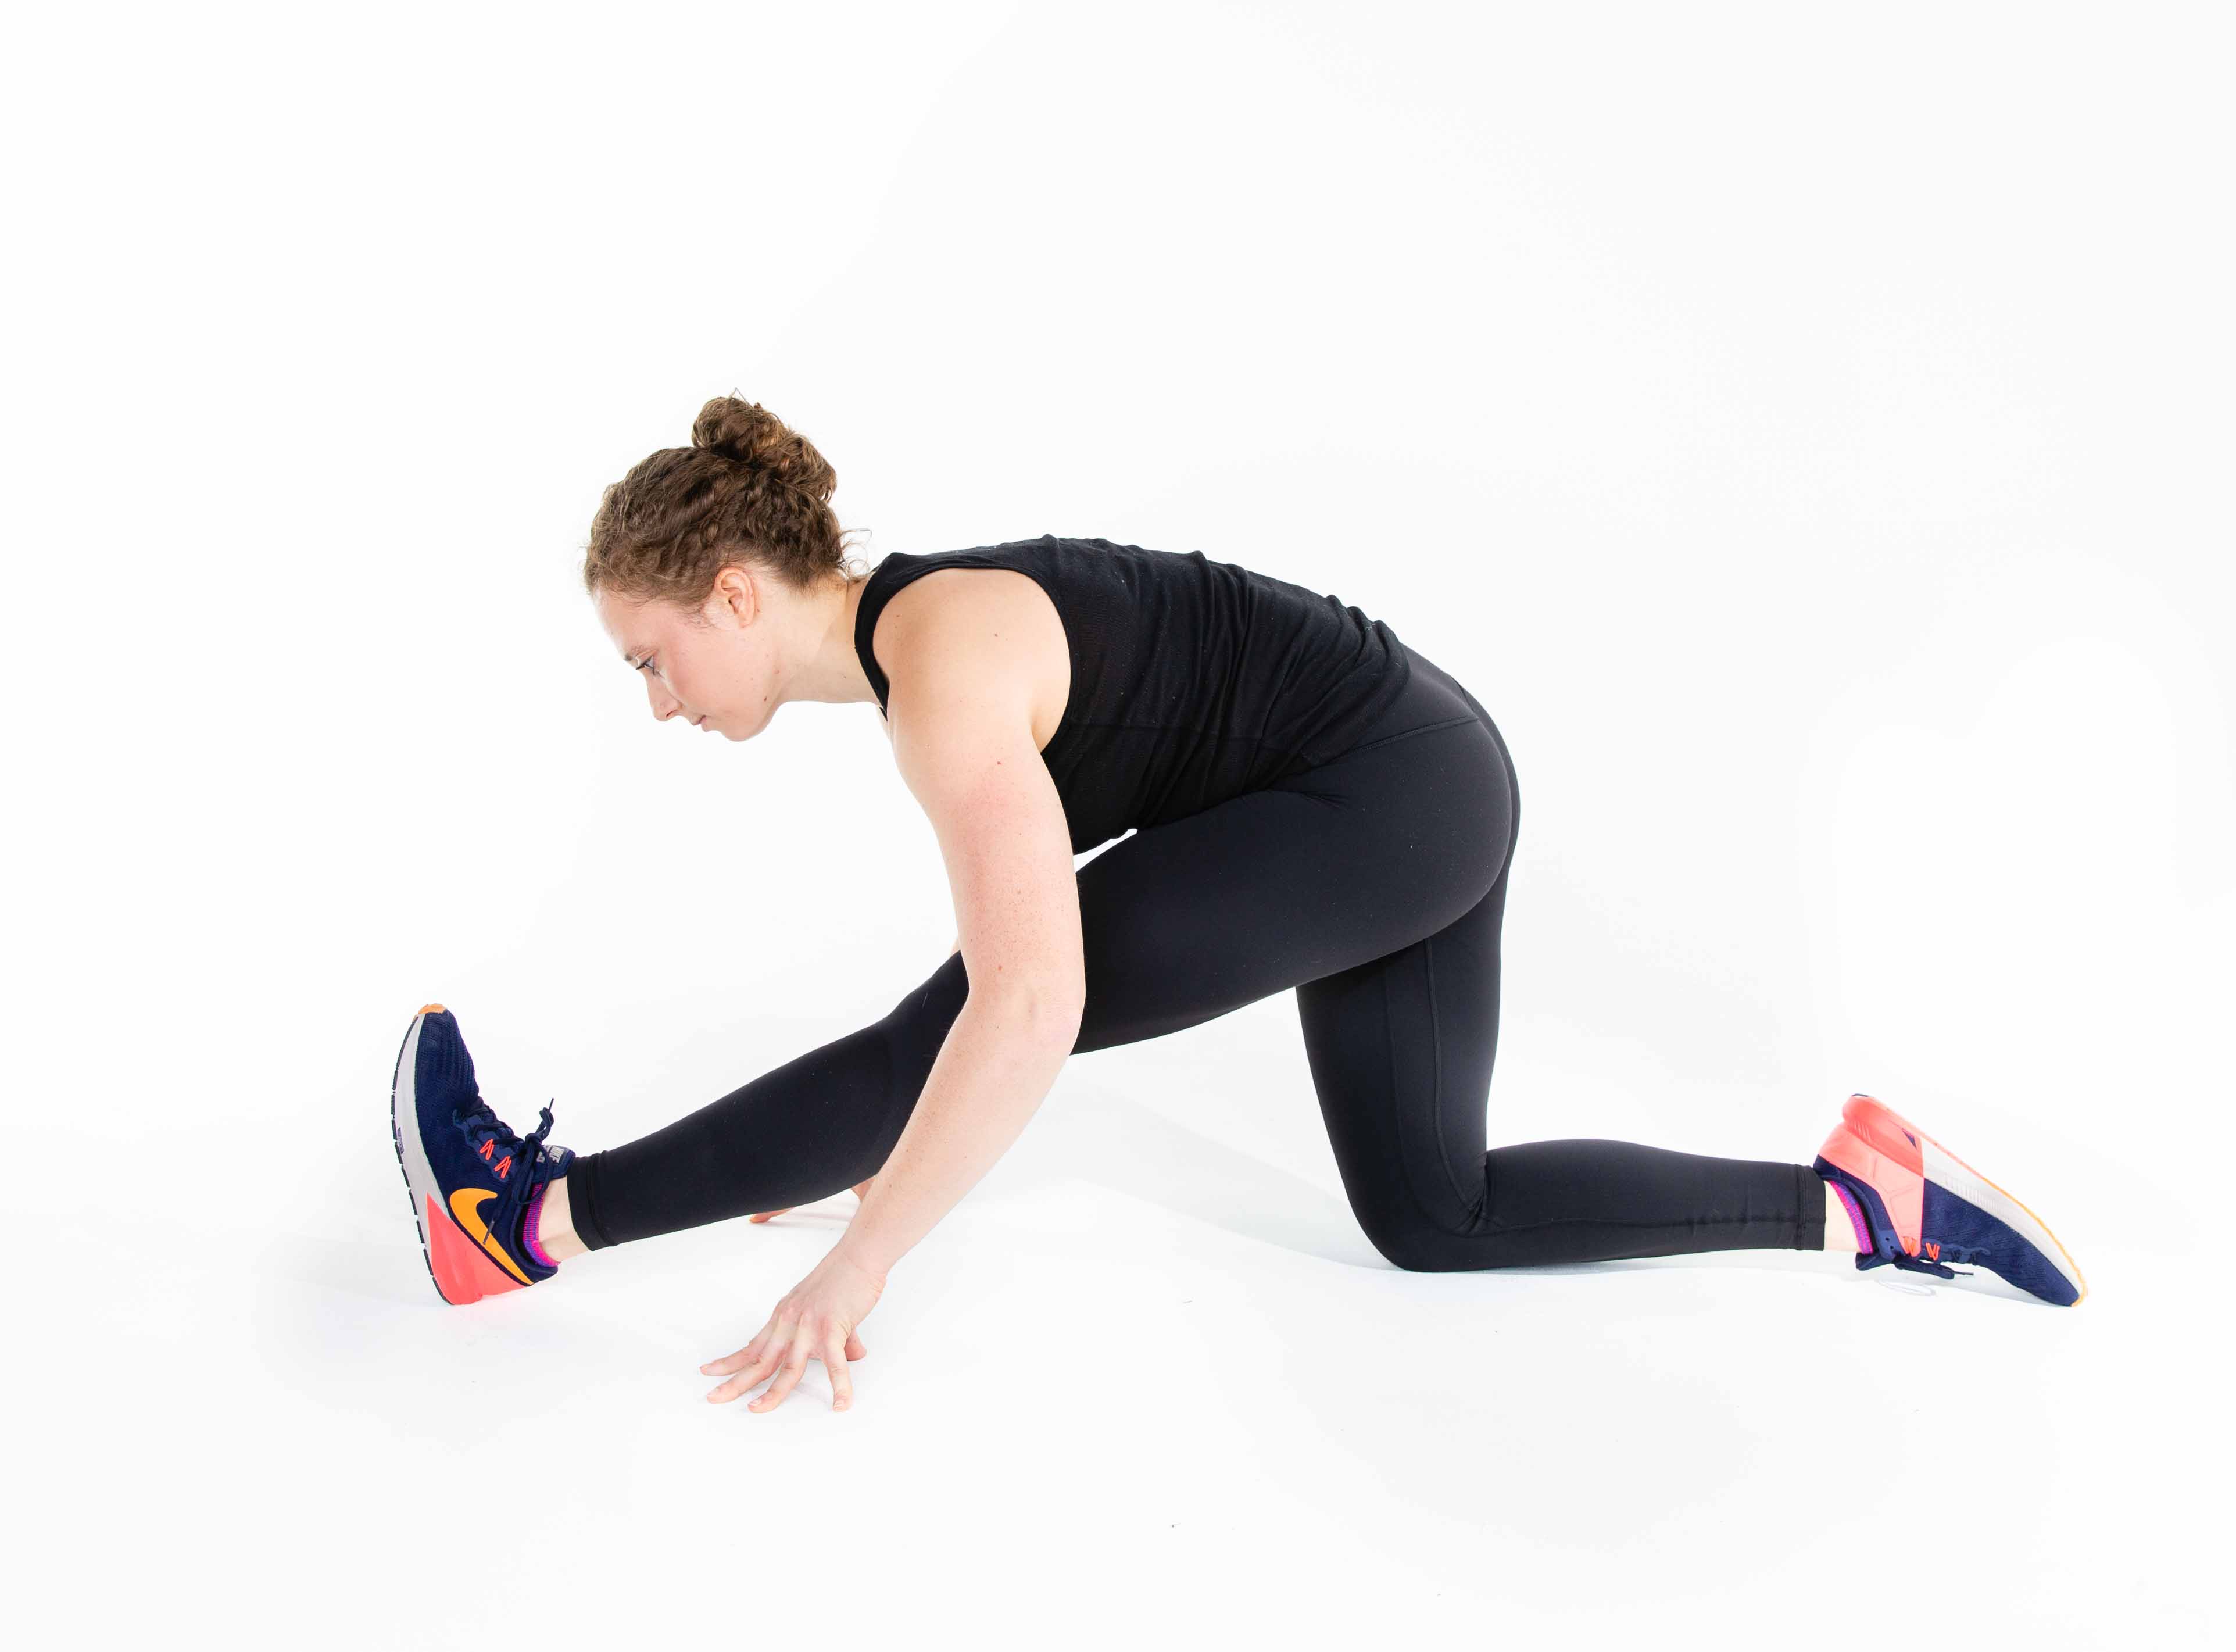 5 Fast and Effective Post-Run Stretches